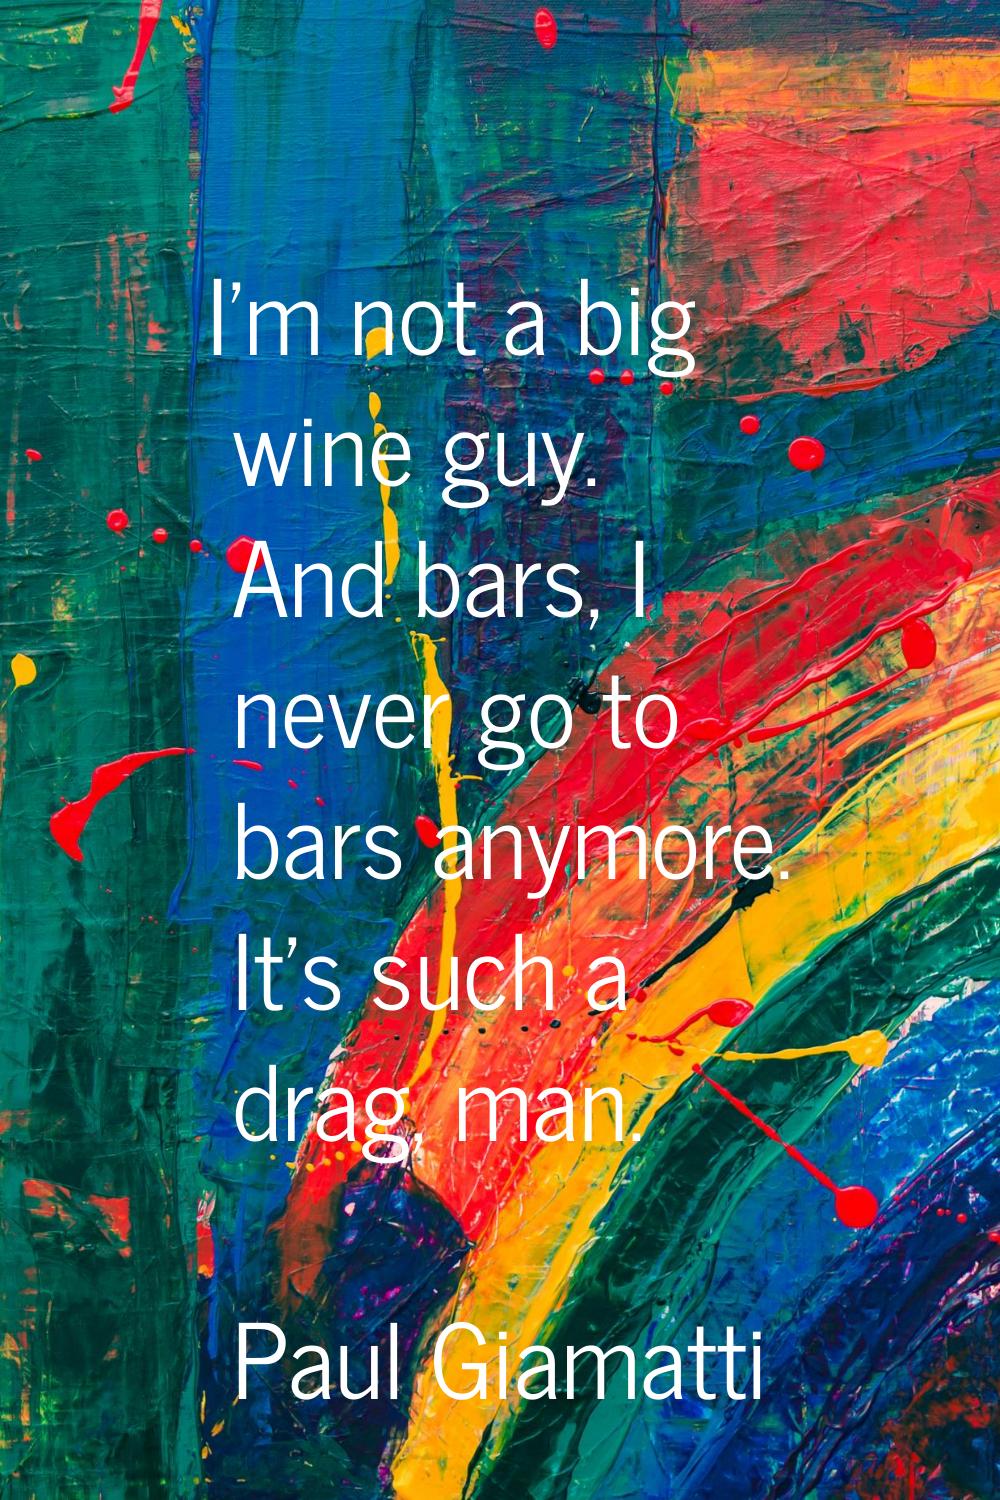 I'm not a big wine guy. And bars, I never go to bars anymore. It's such a drag, man.